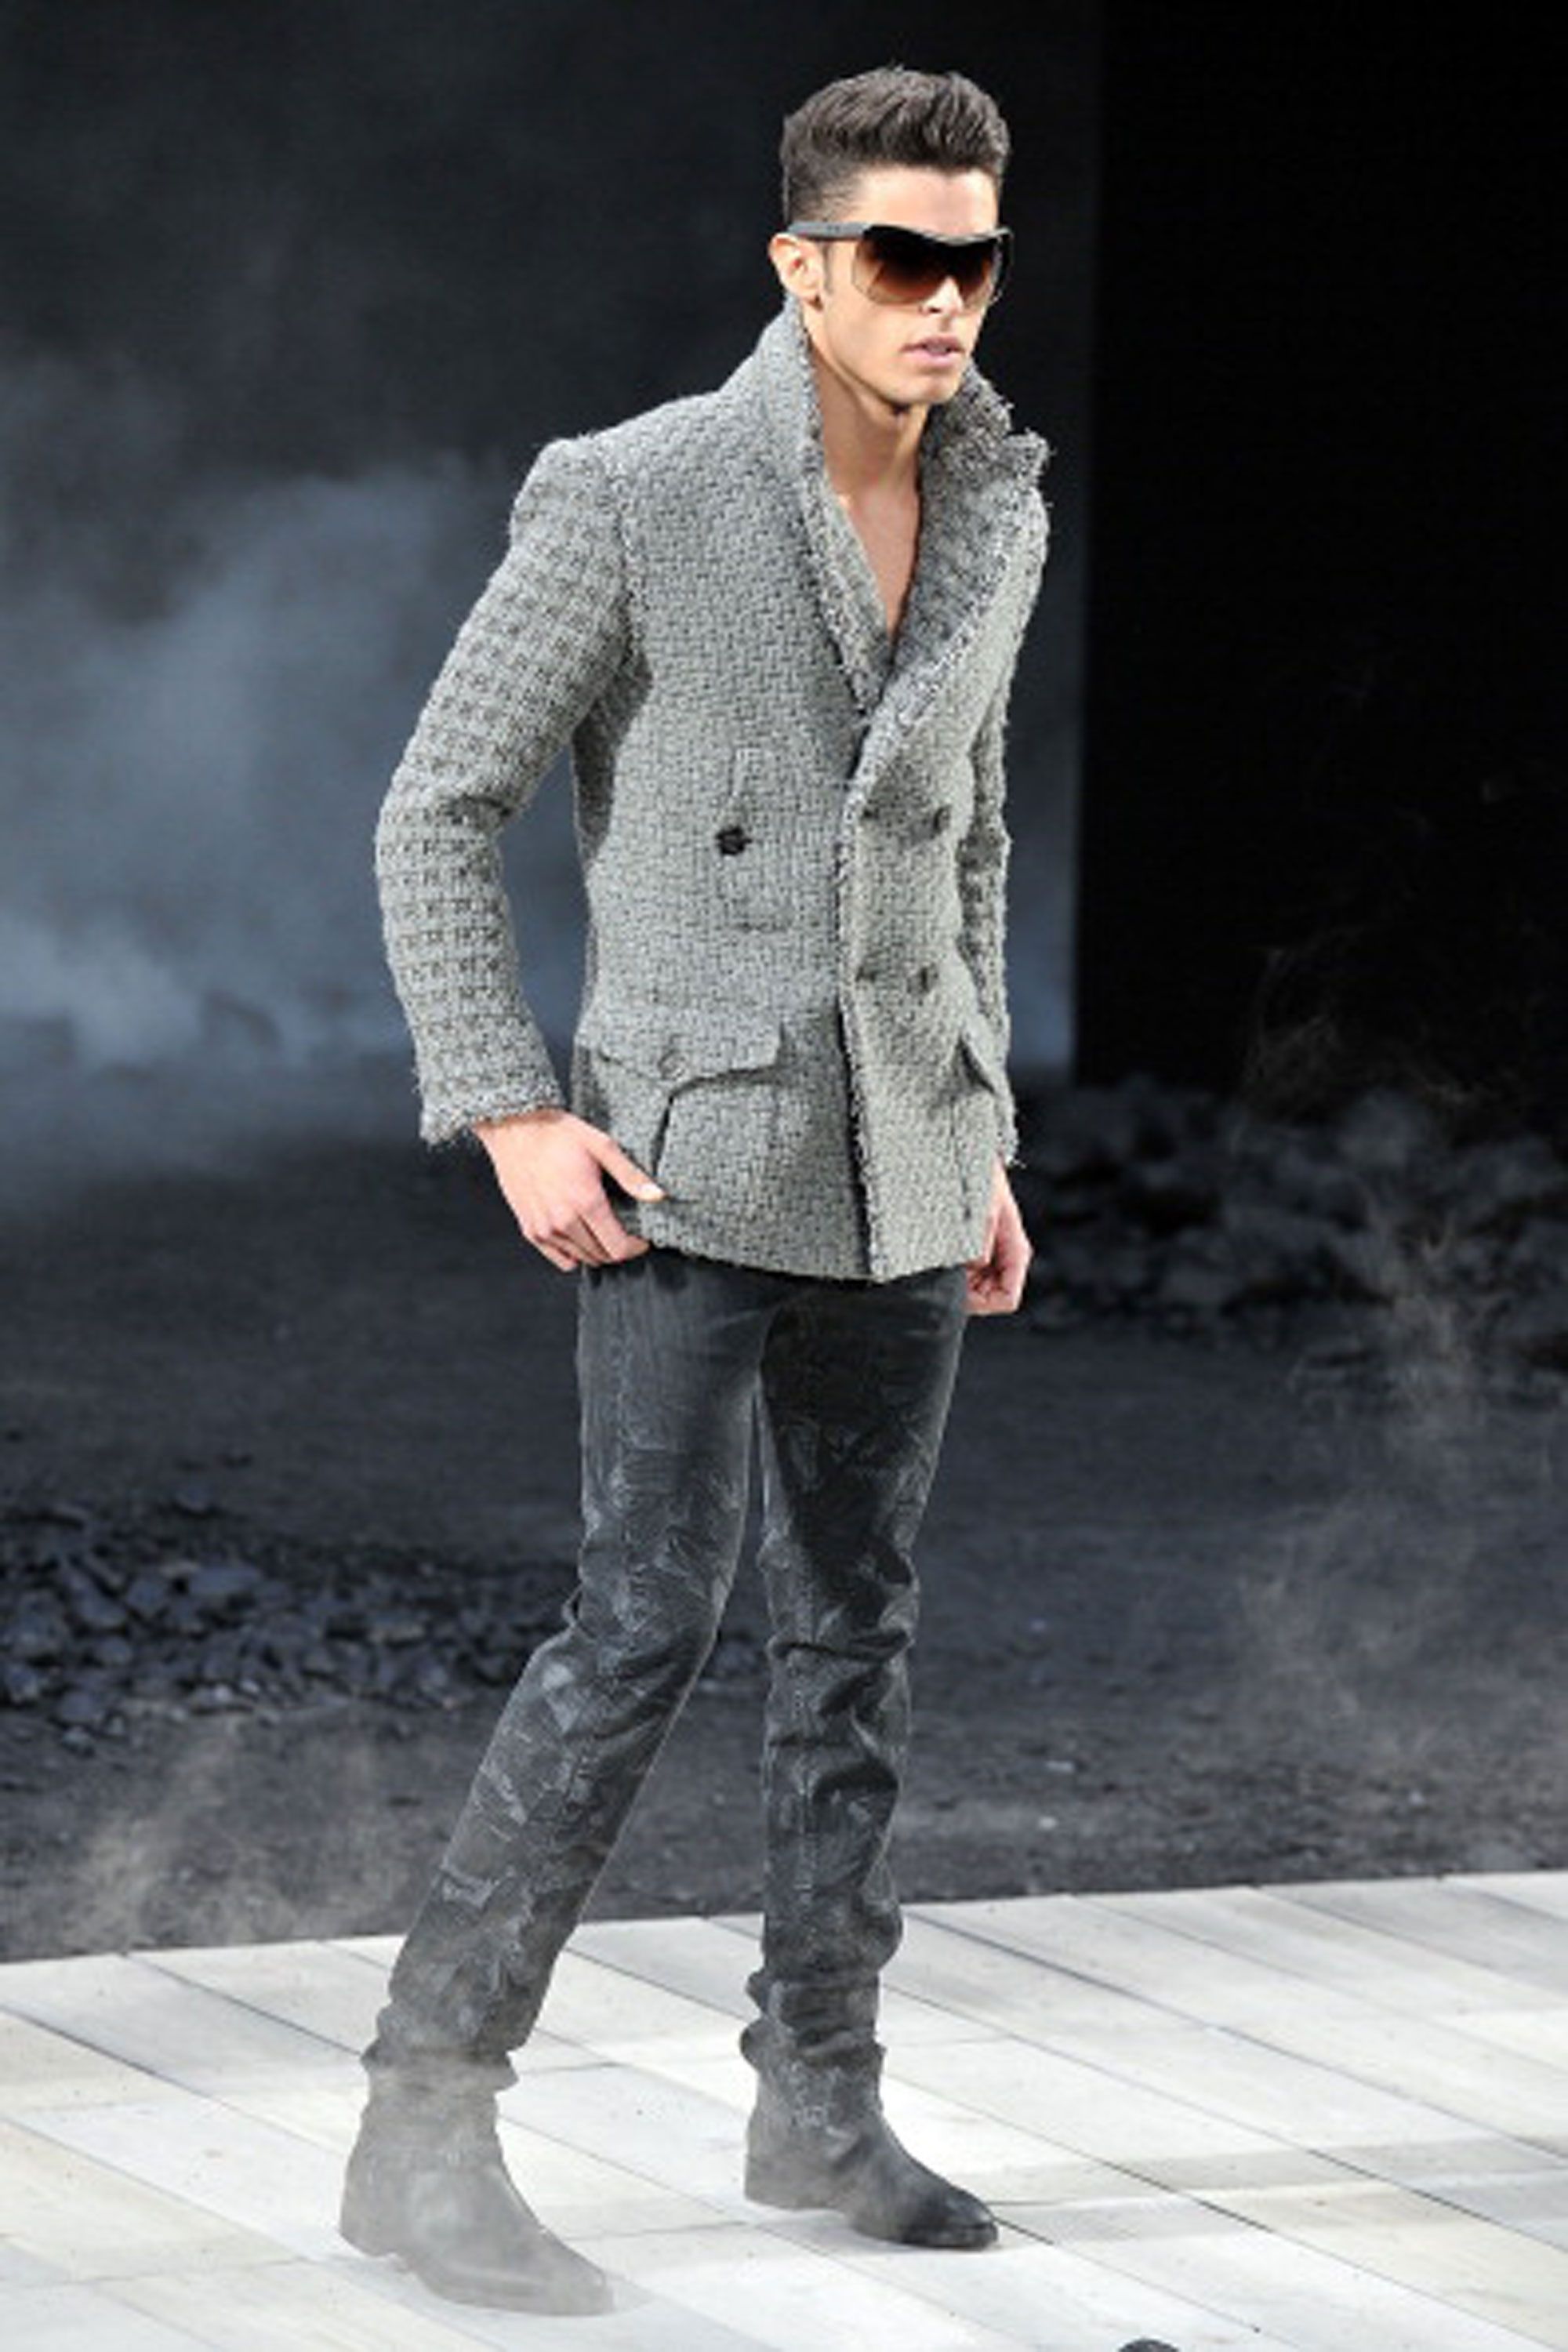 Giveon Gives Chanel Menswear Treatment in Tweed Suit at Grammy Awards   Footwear News